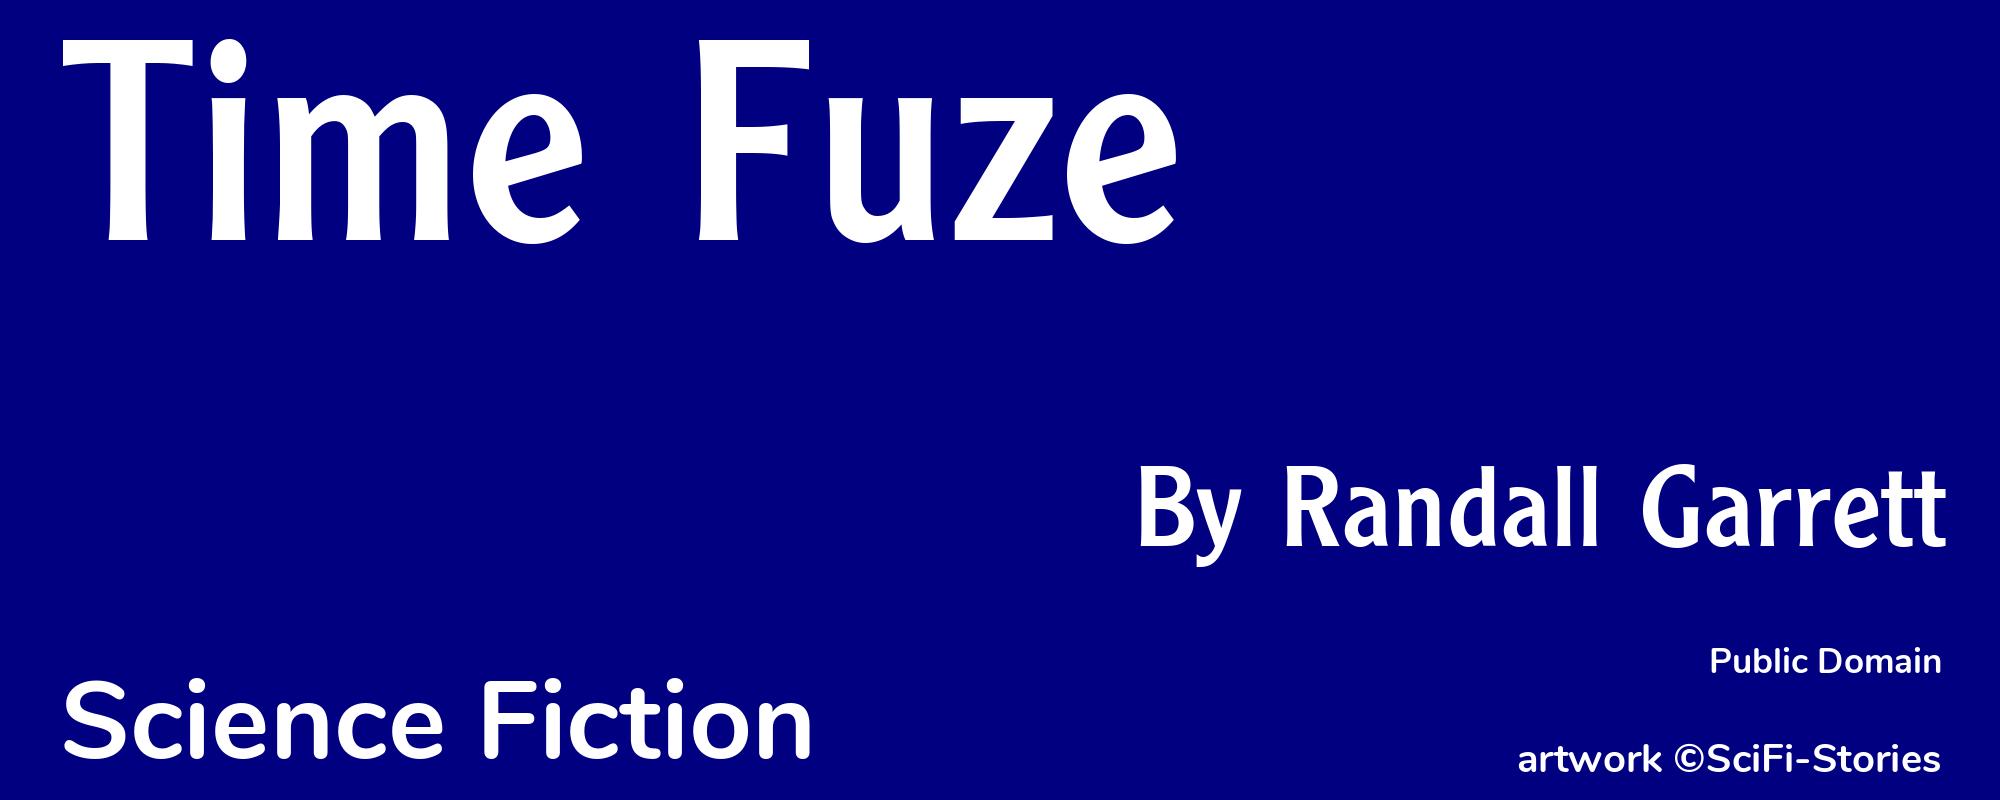 Time Fuze - Cover